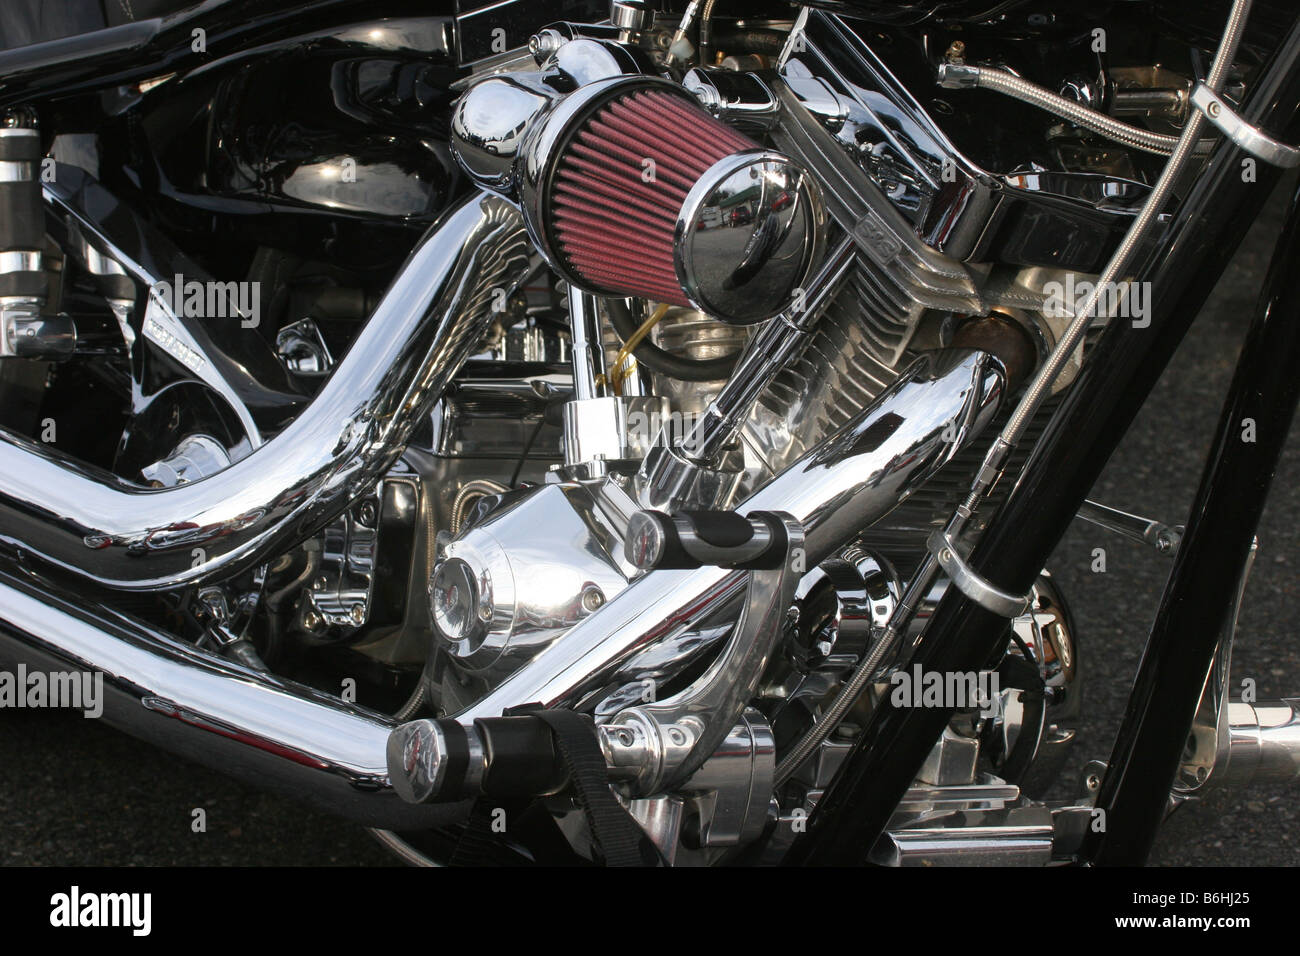 Close up of customized motorcycle Stock Photo